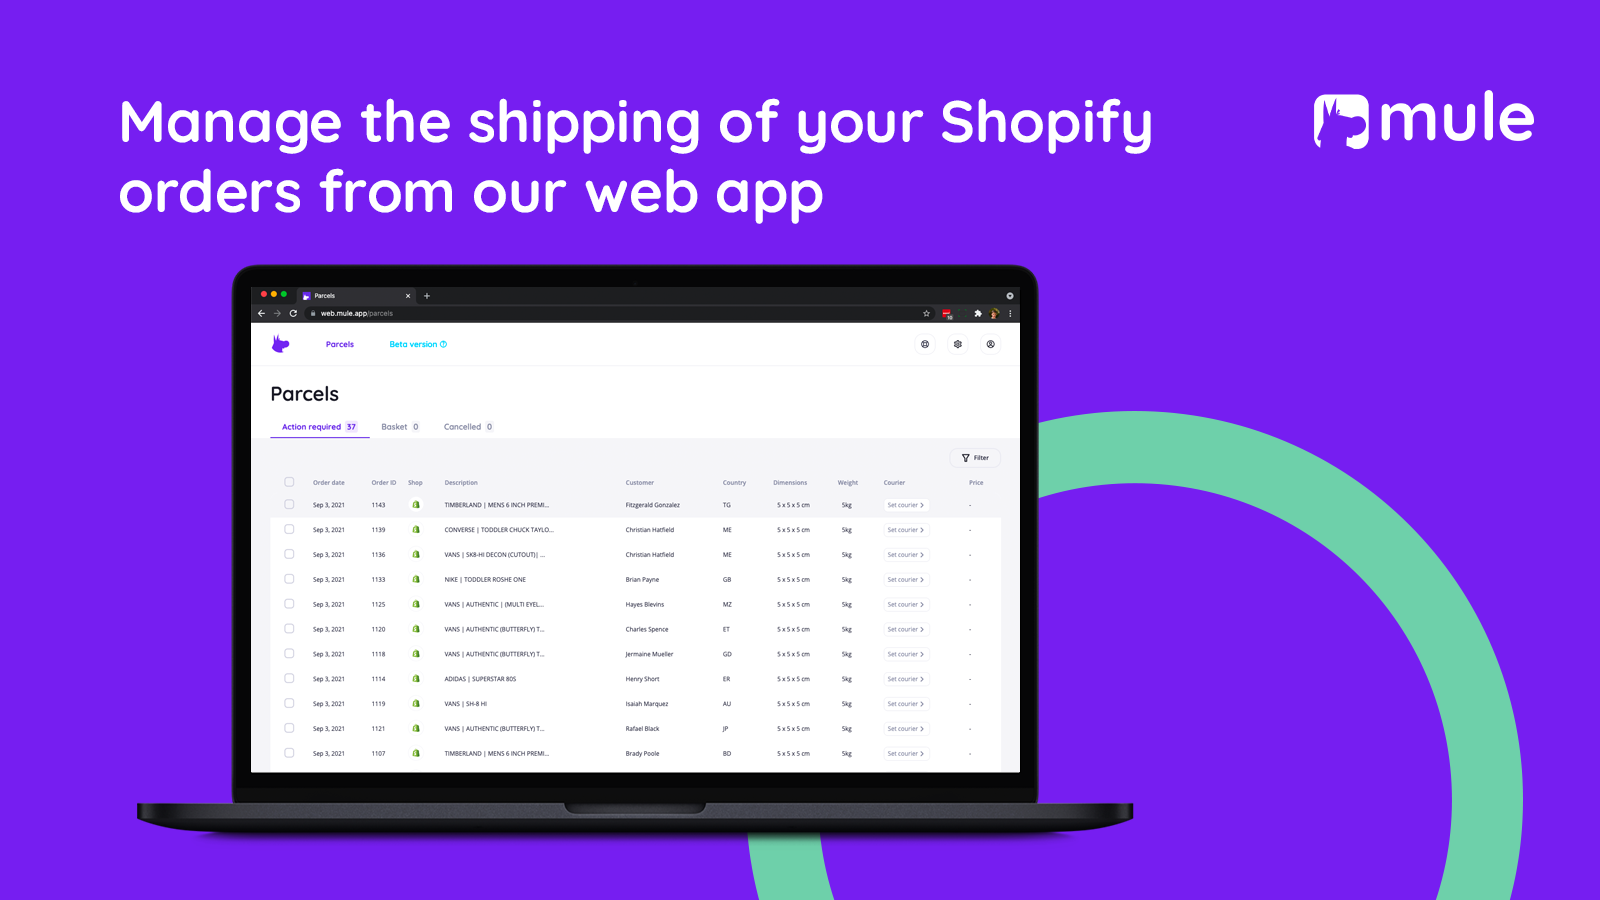 Manage the shipping of your orders from our web app